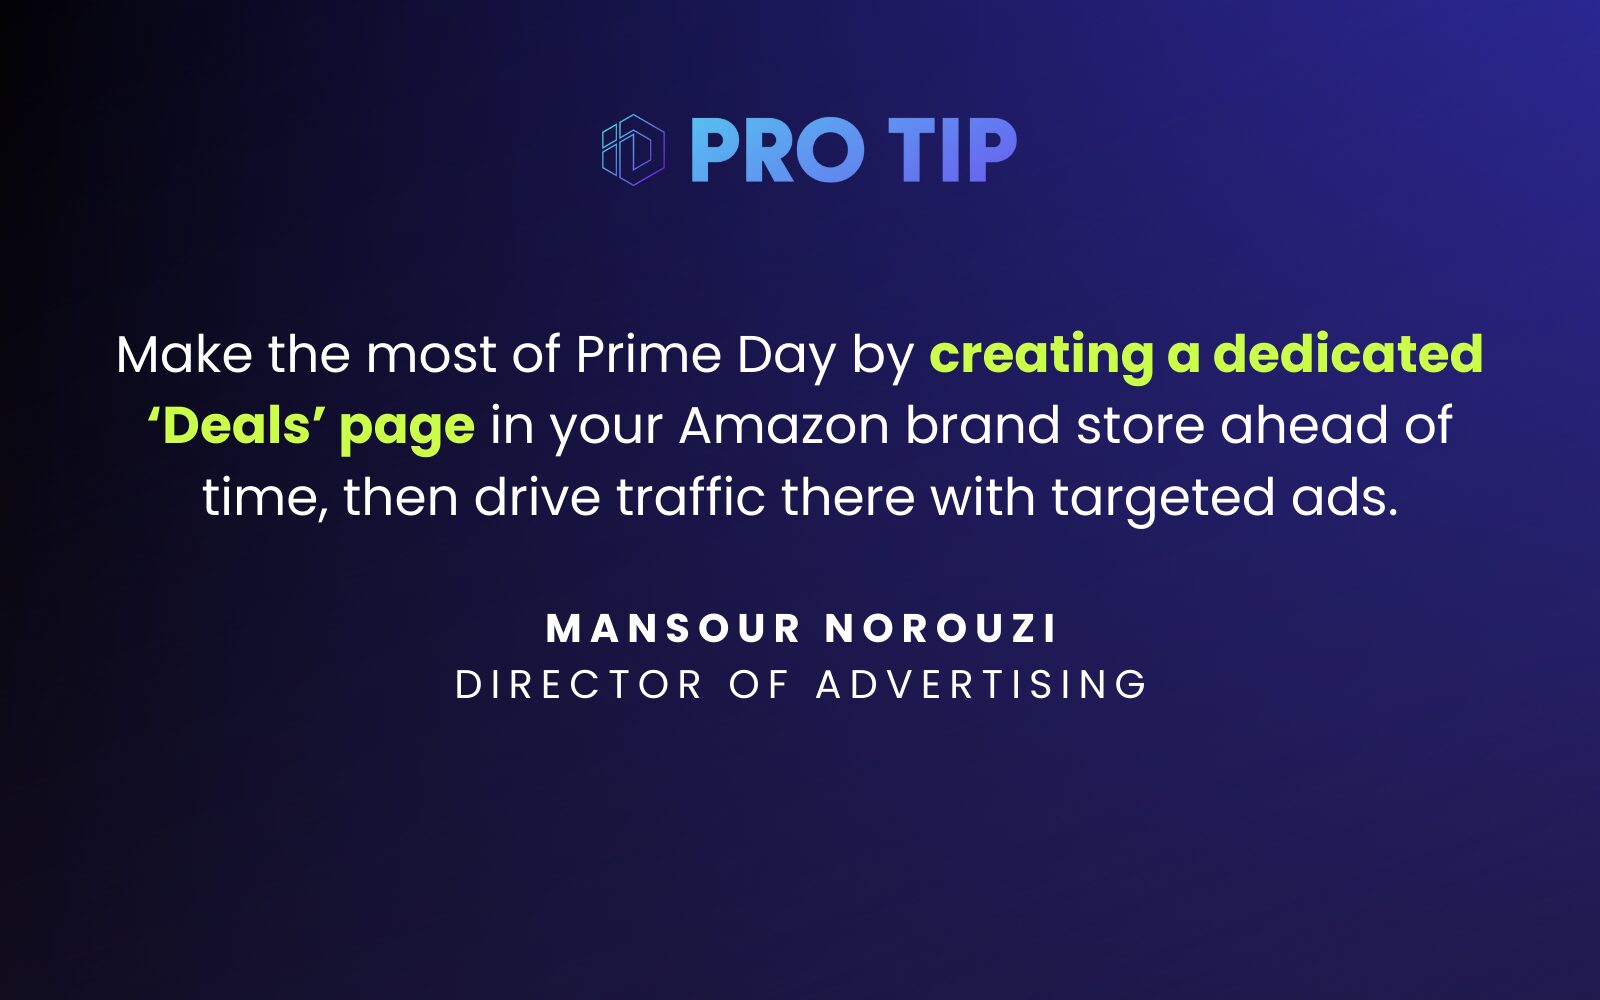 “Make the most of Prime Day by creating a dedicated ‘Deals’ page in your Amazon brand store ahead of time, then drive traffic there with targeted ads.” Mansour Norouzi Director of Advertising